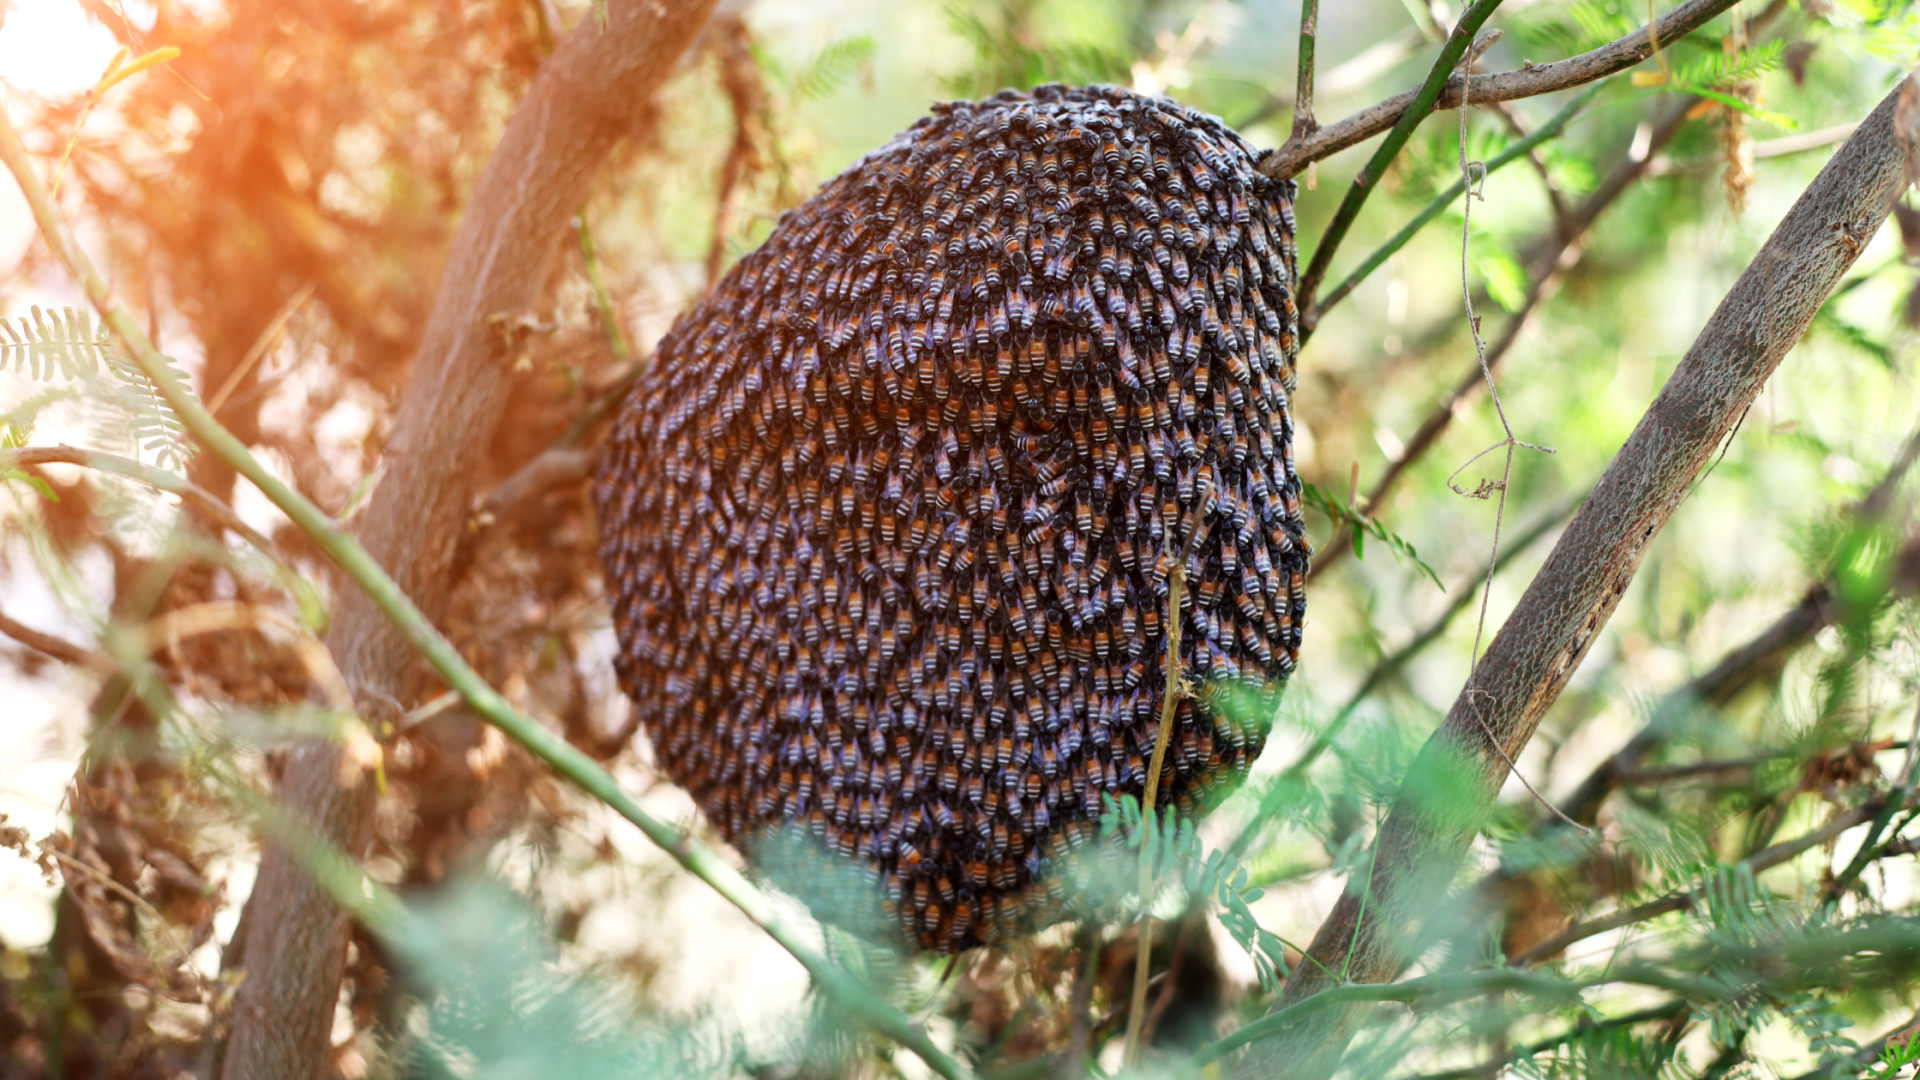 A bee hive in a tree